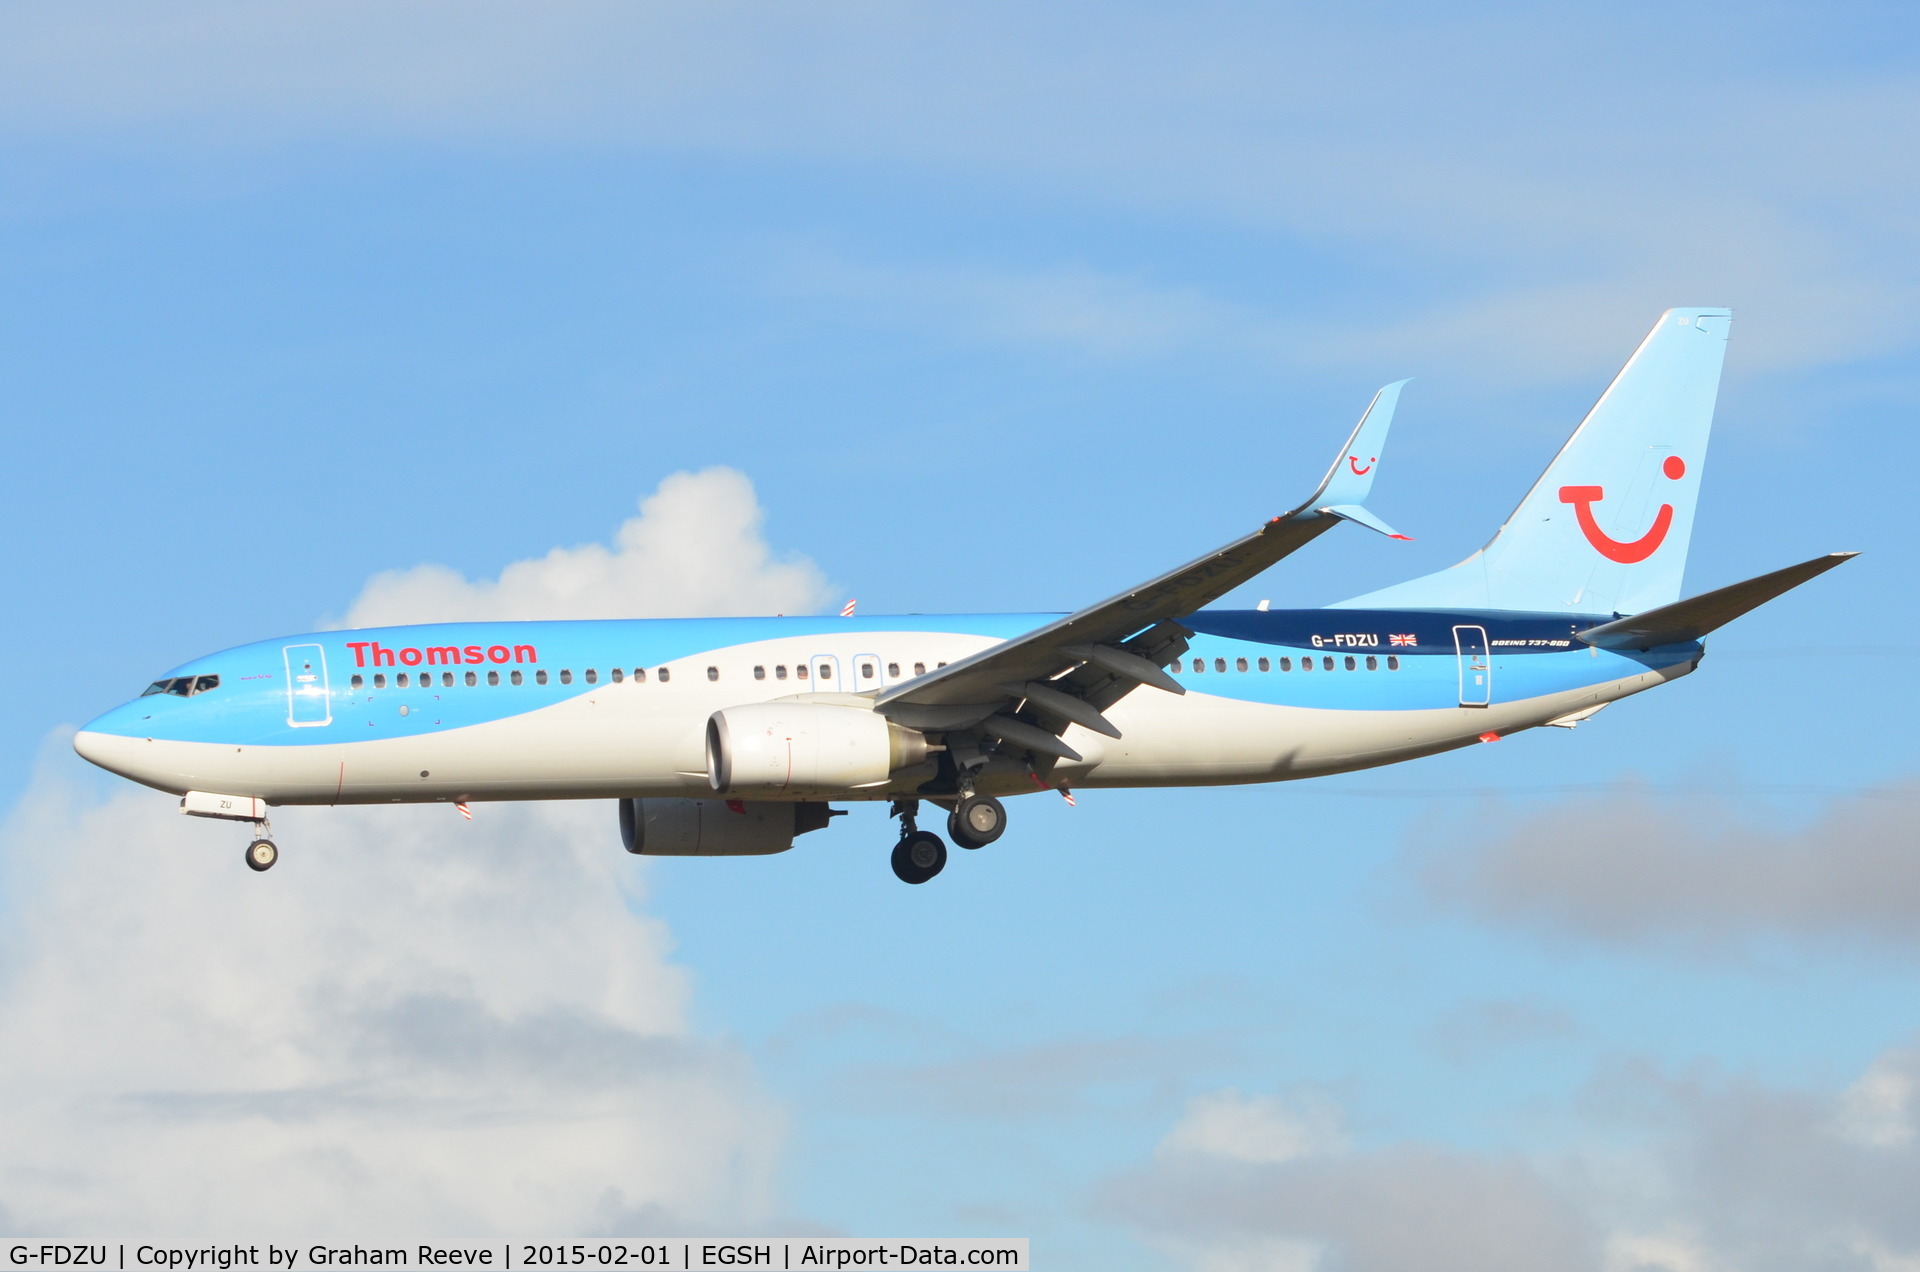 G-FDZU, 2011 Boeing 737-8K5 C/N 37253, Seen landing and fitted with scimitar winglets.